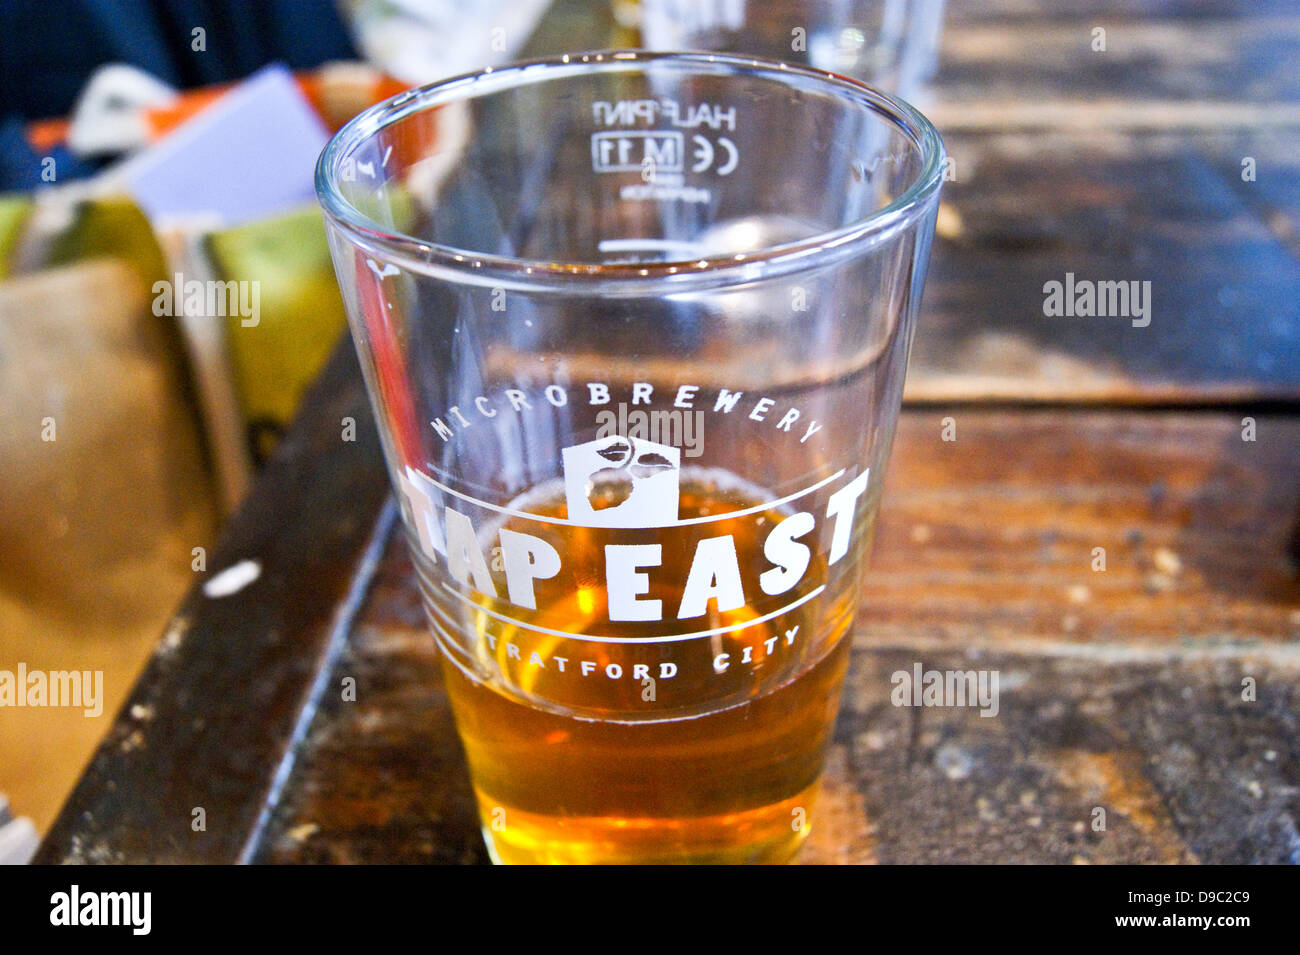 A pint of pale ale in a printed glass at Tap East bar, Westfield, Stratford, London, England pub table drinks glasses UK Stock Photo